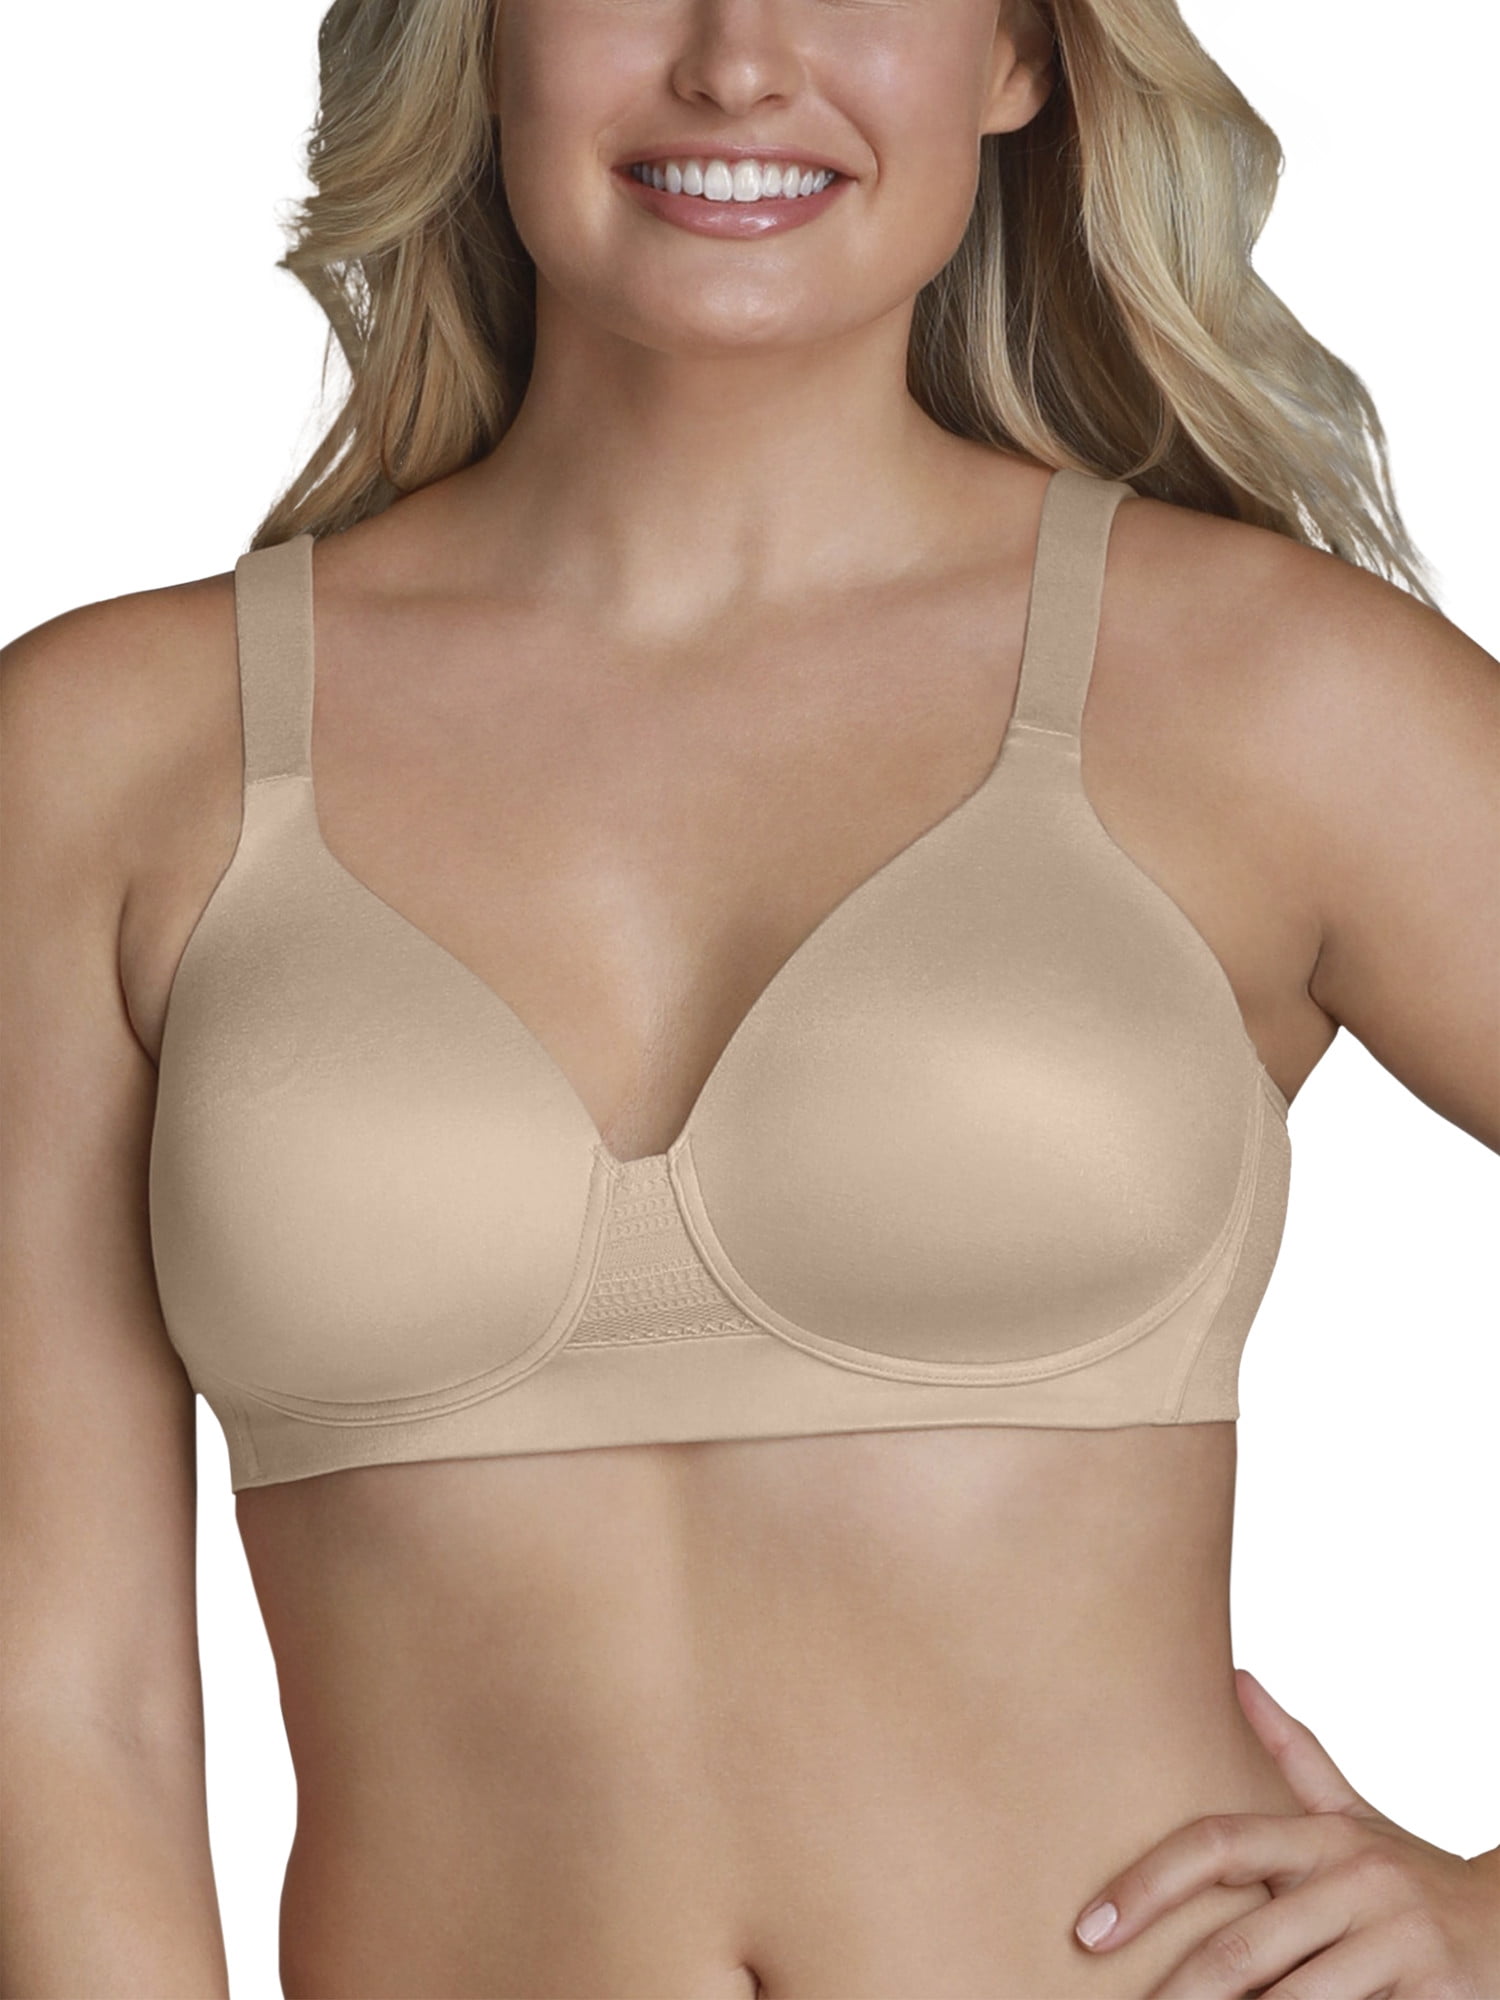 Full Coverage Details about   Vanity Fair Women's Beyond Comfort Seamless Back 36B Neutral